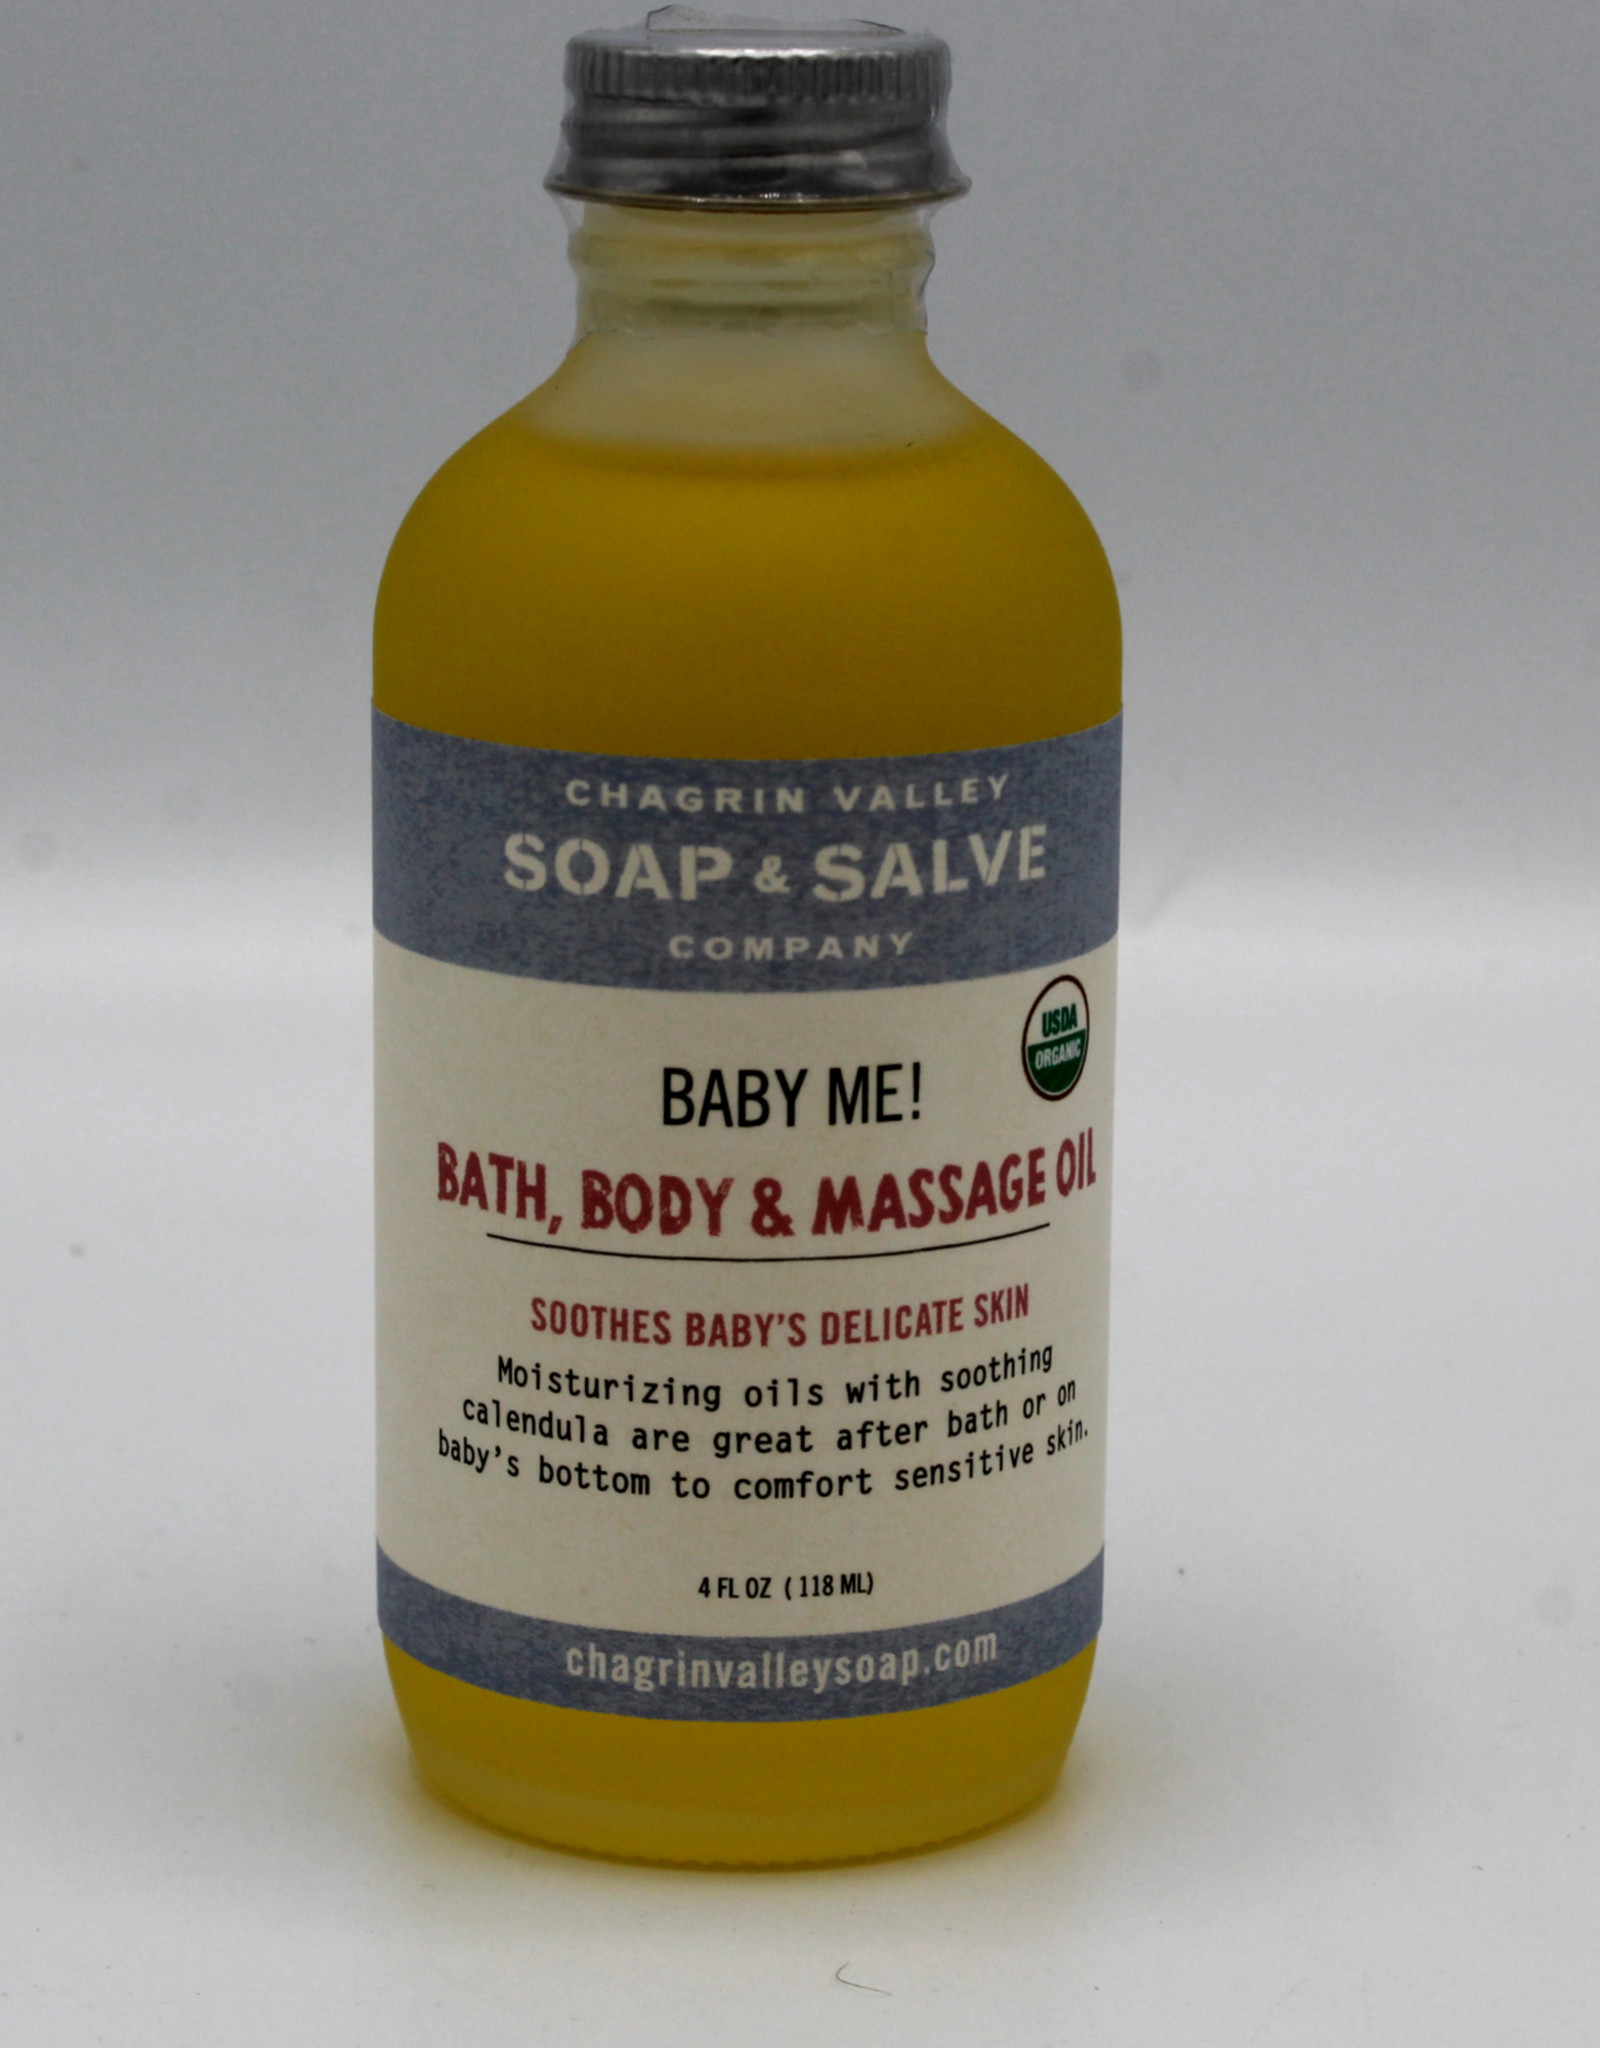 Chagrin Valley Baby Me Bath and Body Oil